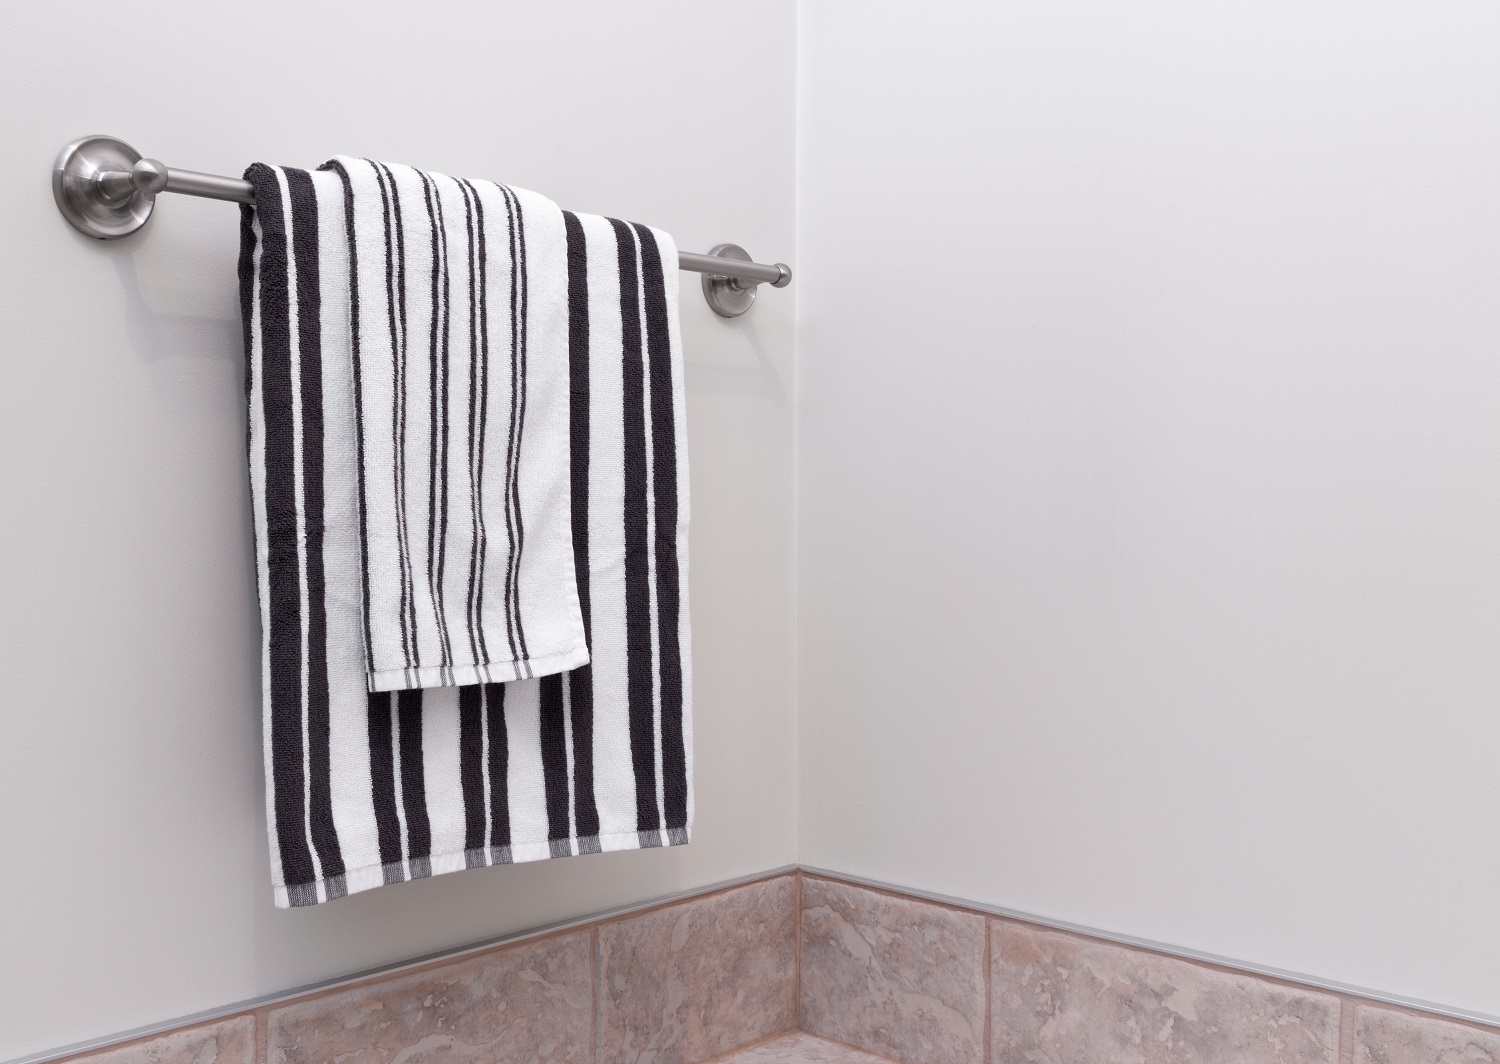 Close up image of black and white striped bath towels